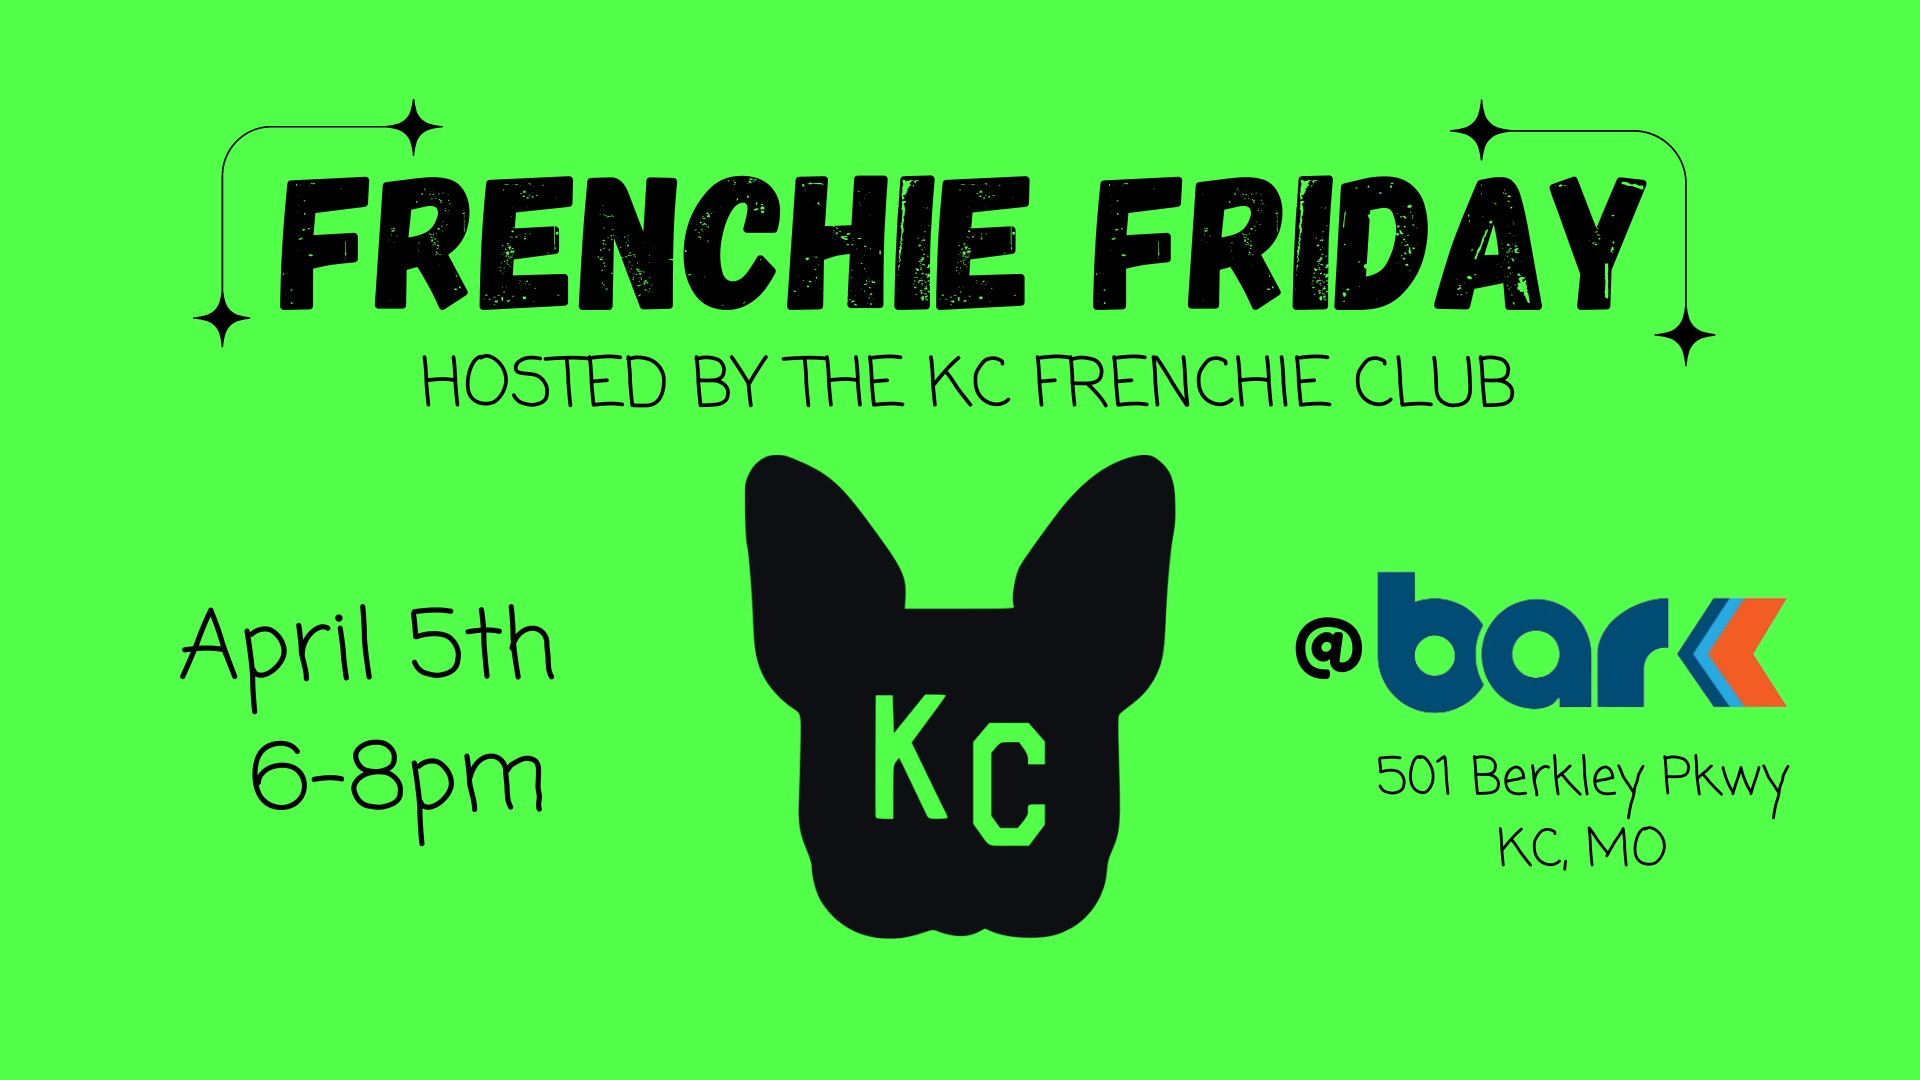 Frenchie friday hosted by the kc frenchie club. April 5th from 6 to 8pm at Bar K. 501 berkley pkwy kc, mo.